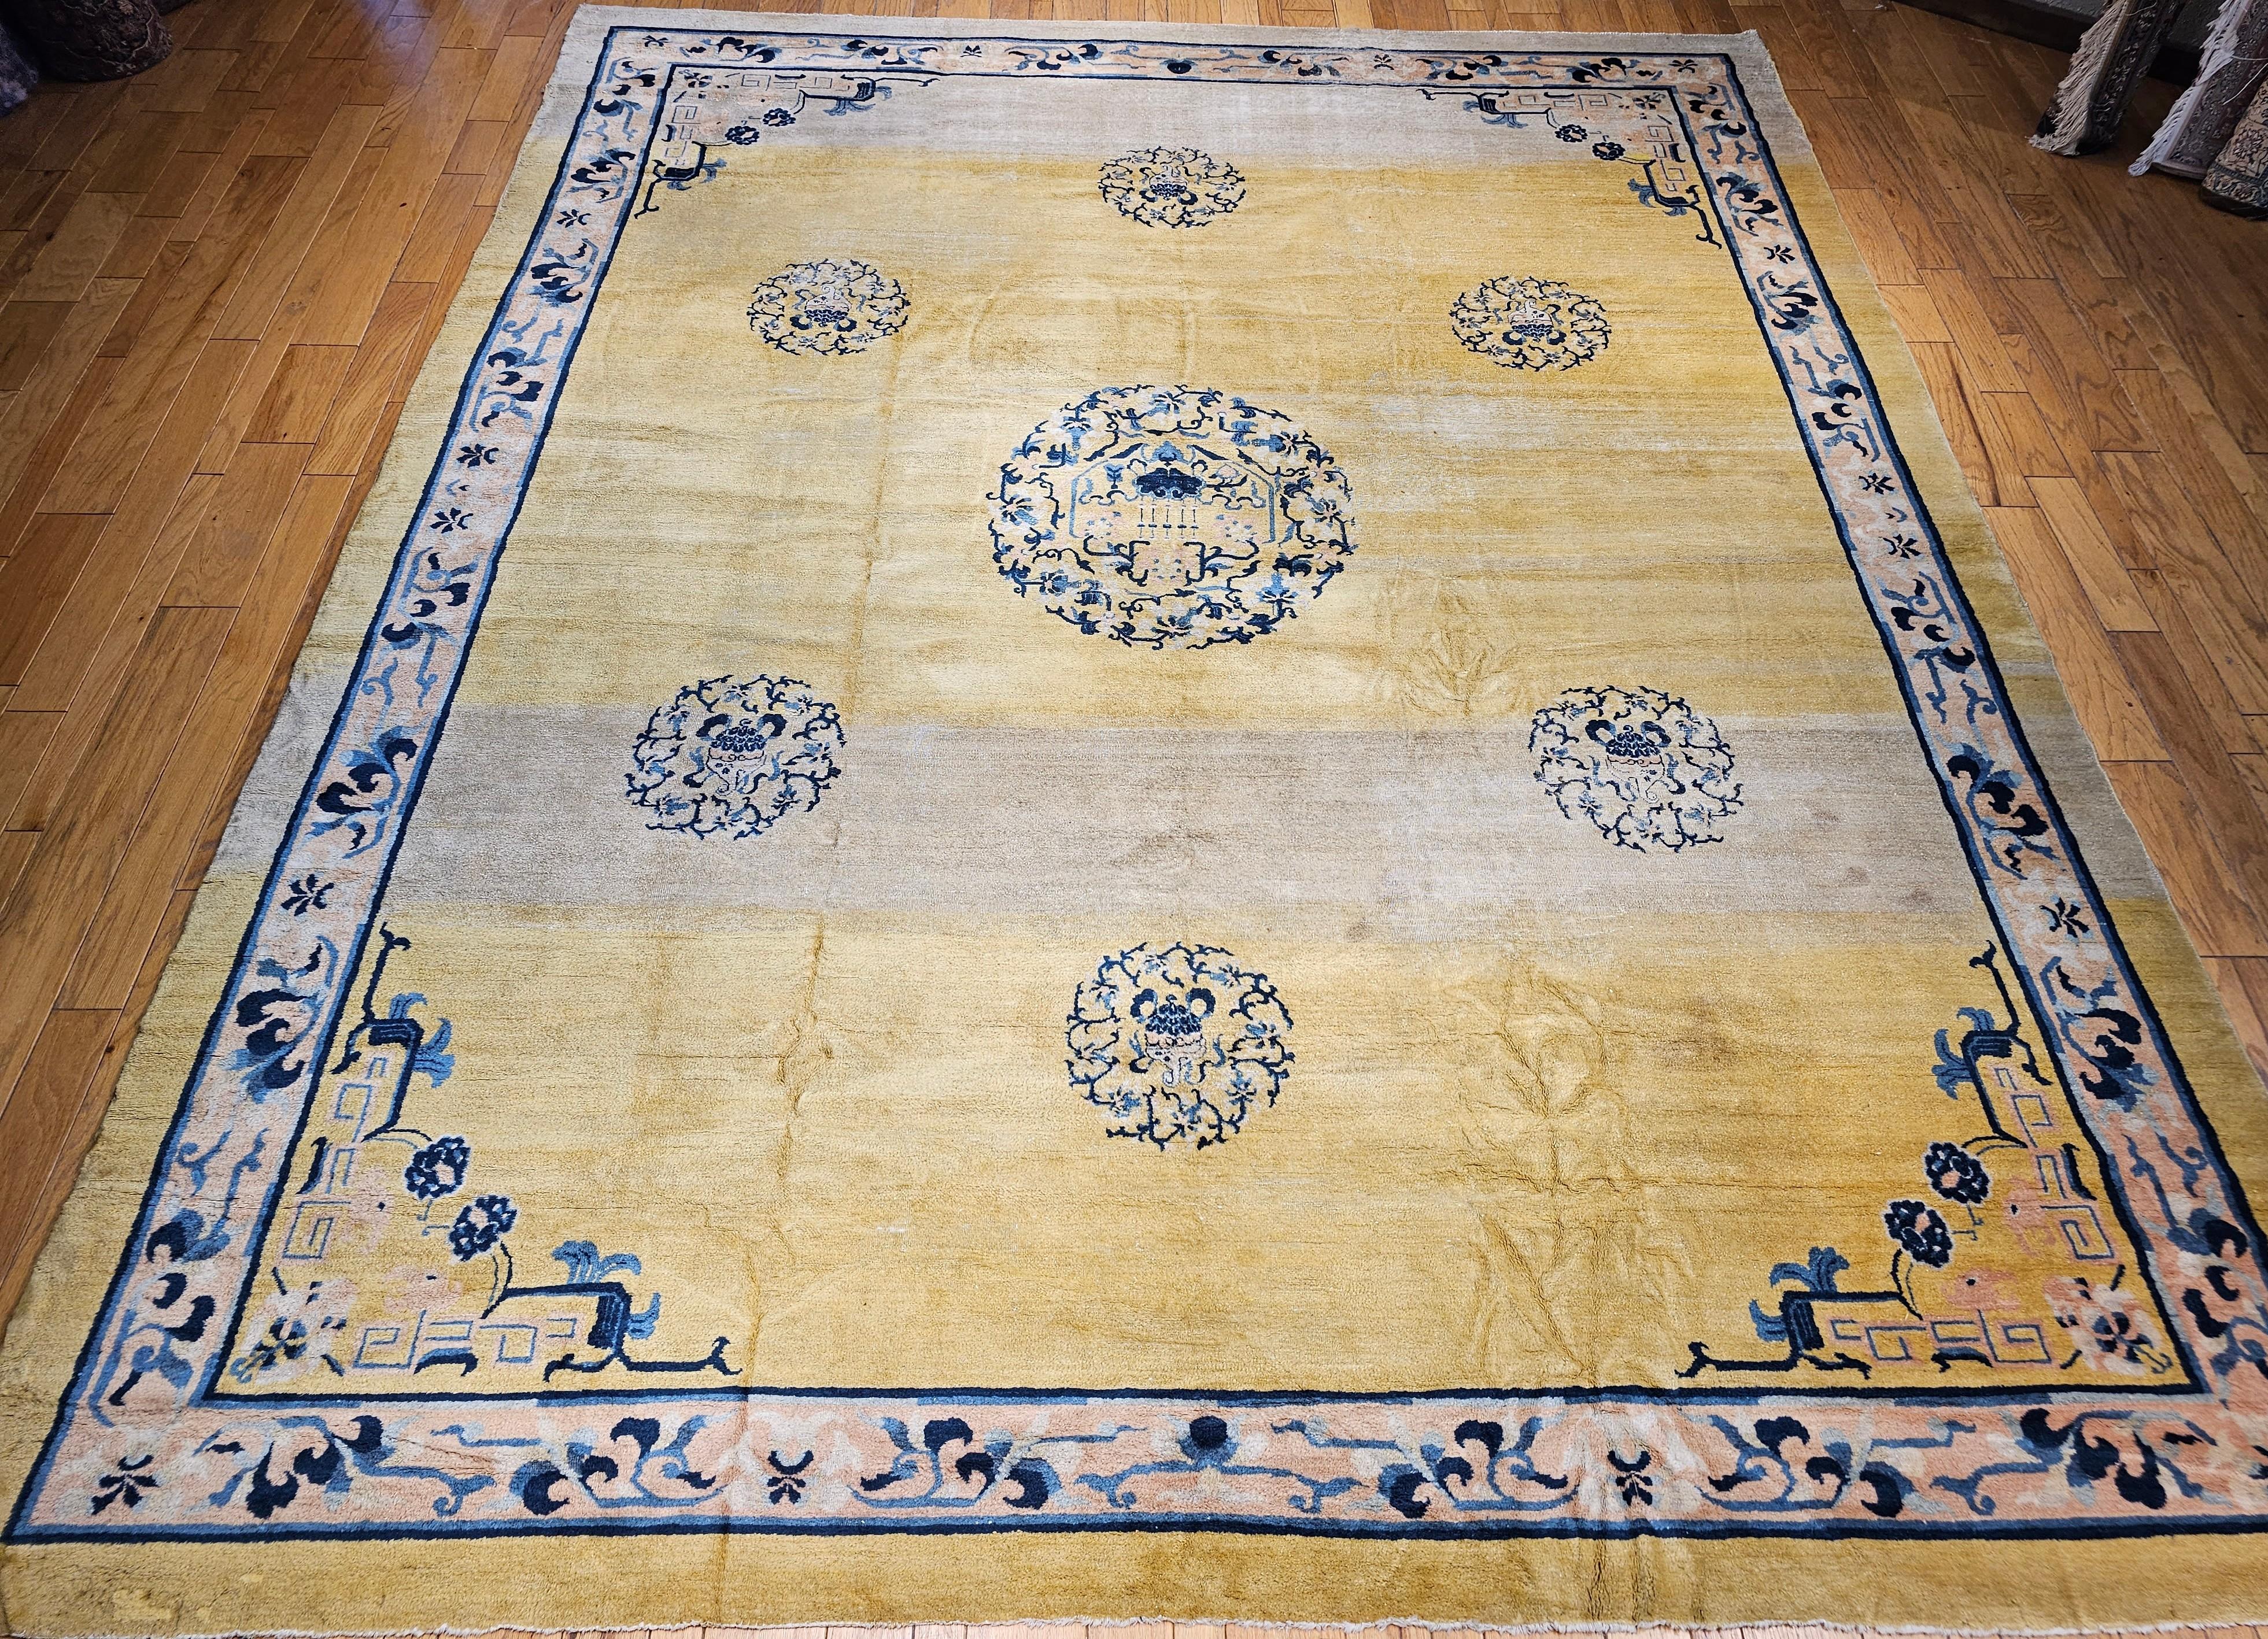 A beautiful Chinese Peking oversized rug from the late 1800s.  The rug has a very unique and beautiful pale yellow color with an open design.  The design in the field consists of a large medallion with lion dogs surrounded by cloud wreaths.  The rug